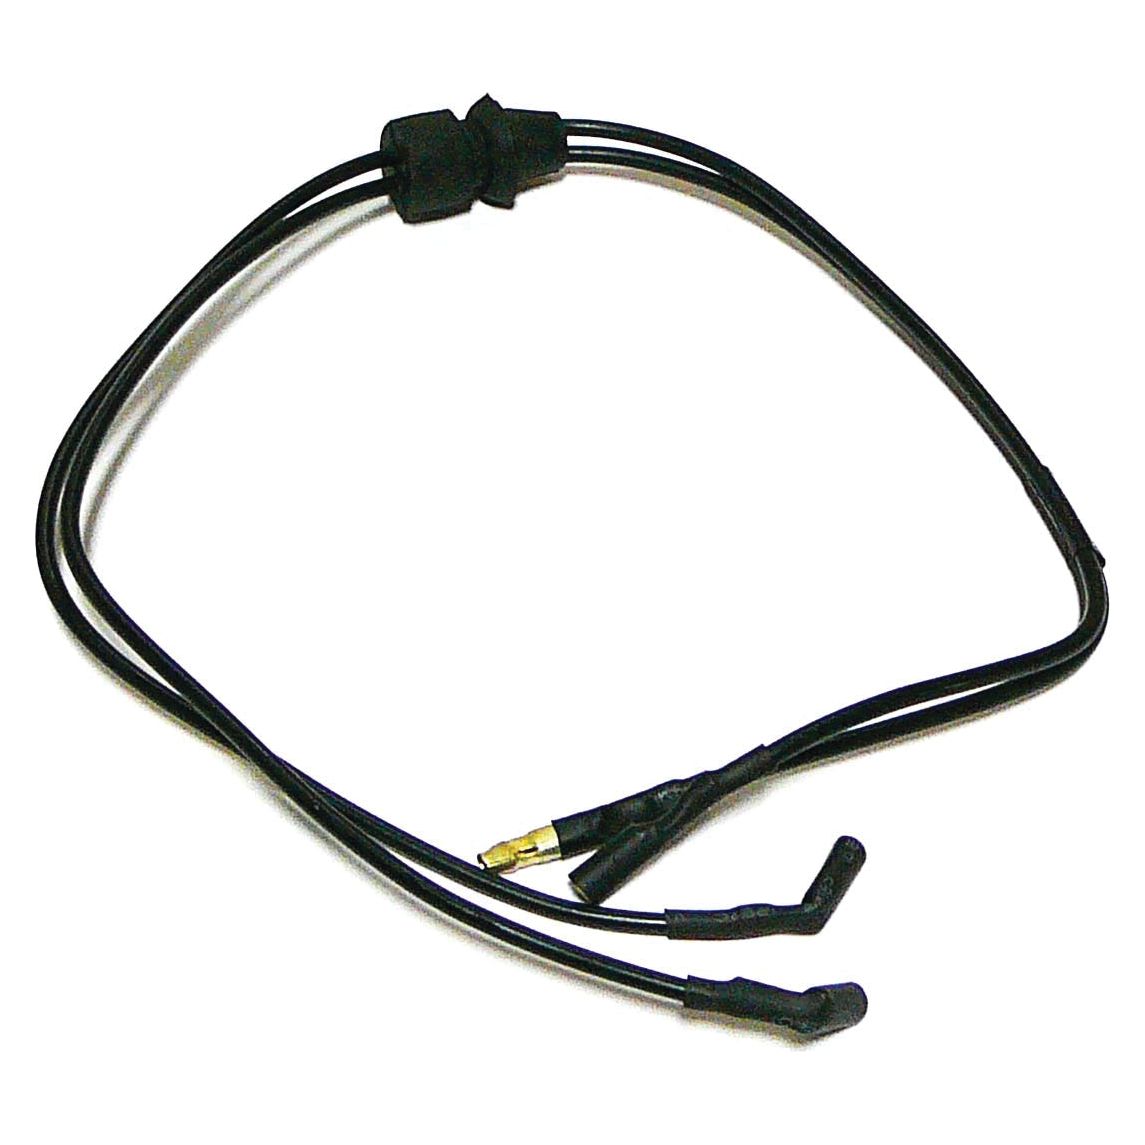 Safety Start Harness
 - S.67186 - Massey Tractor Parts